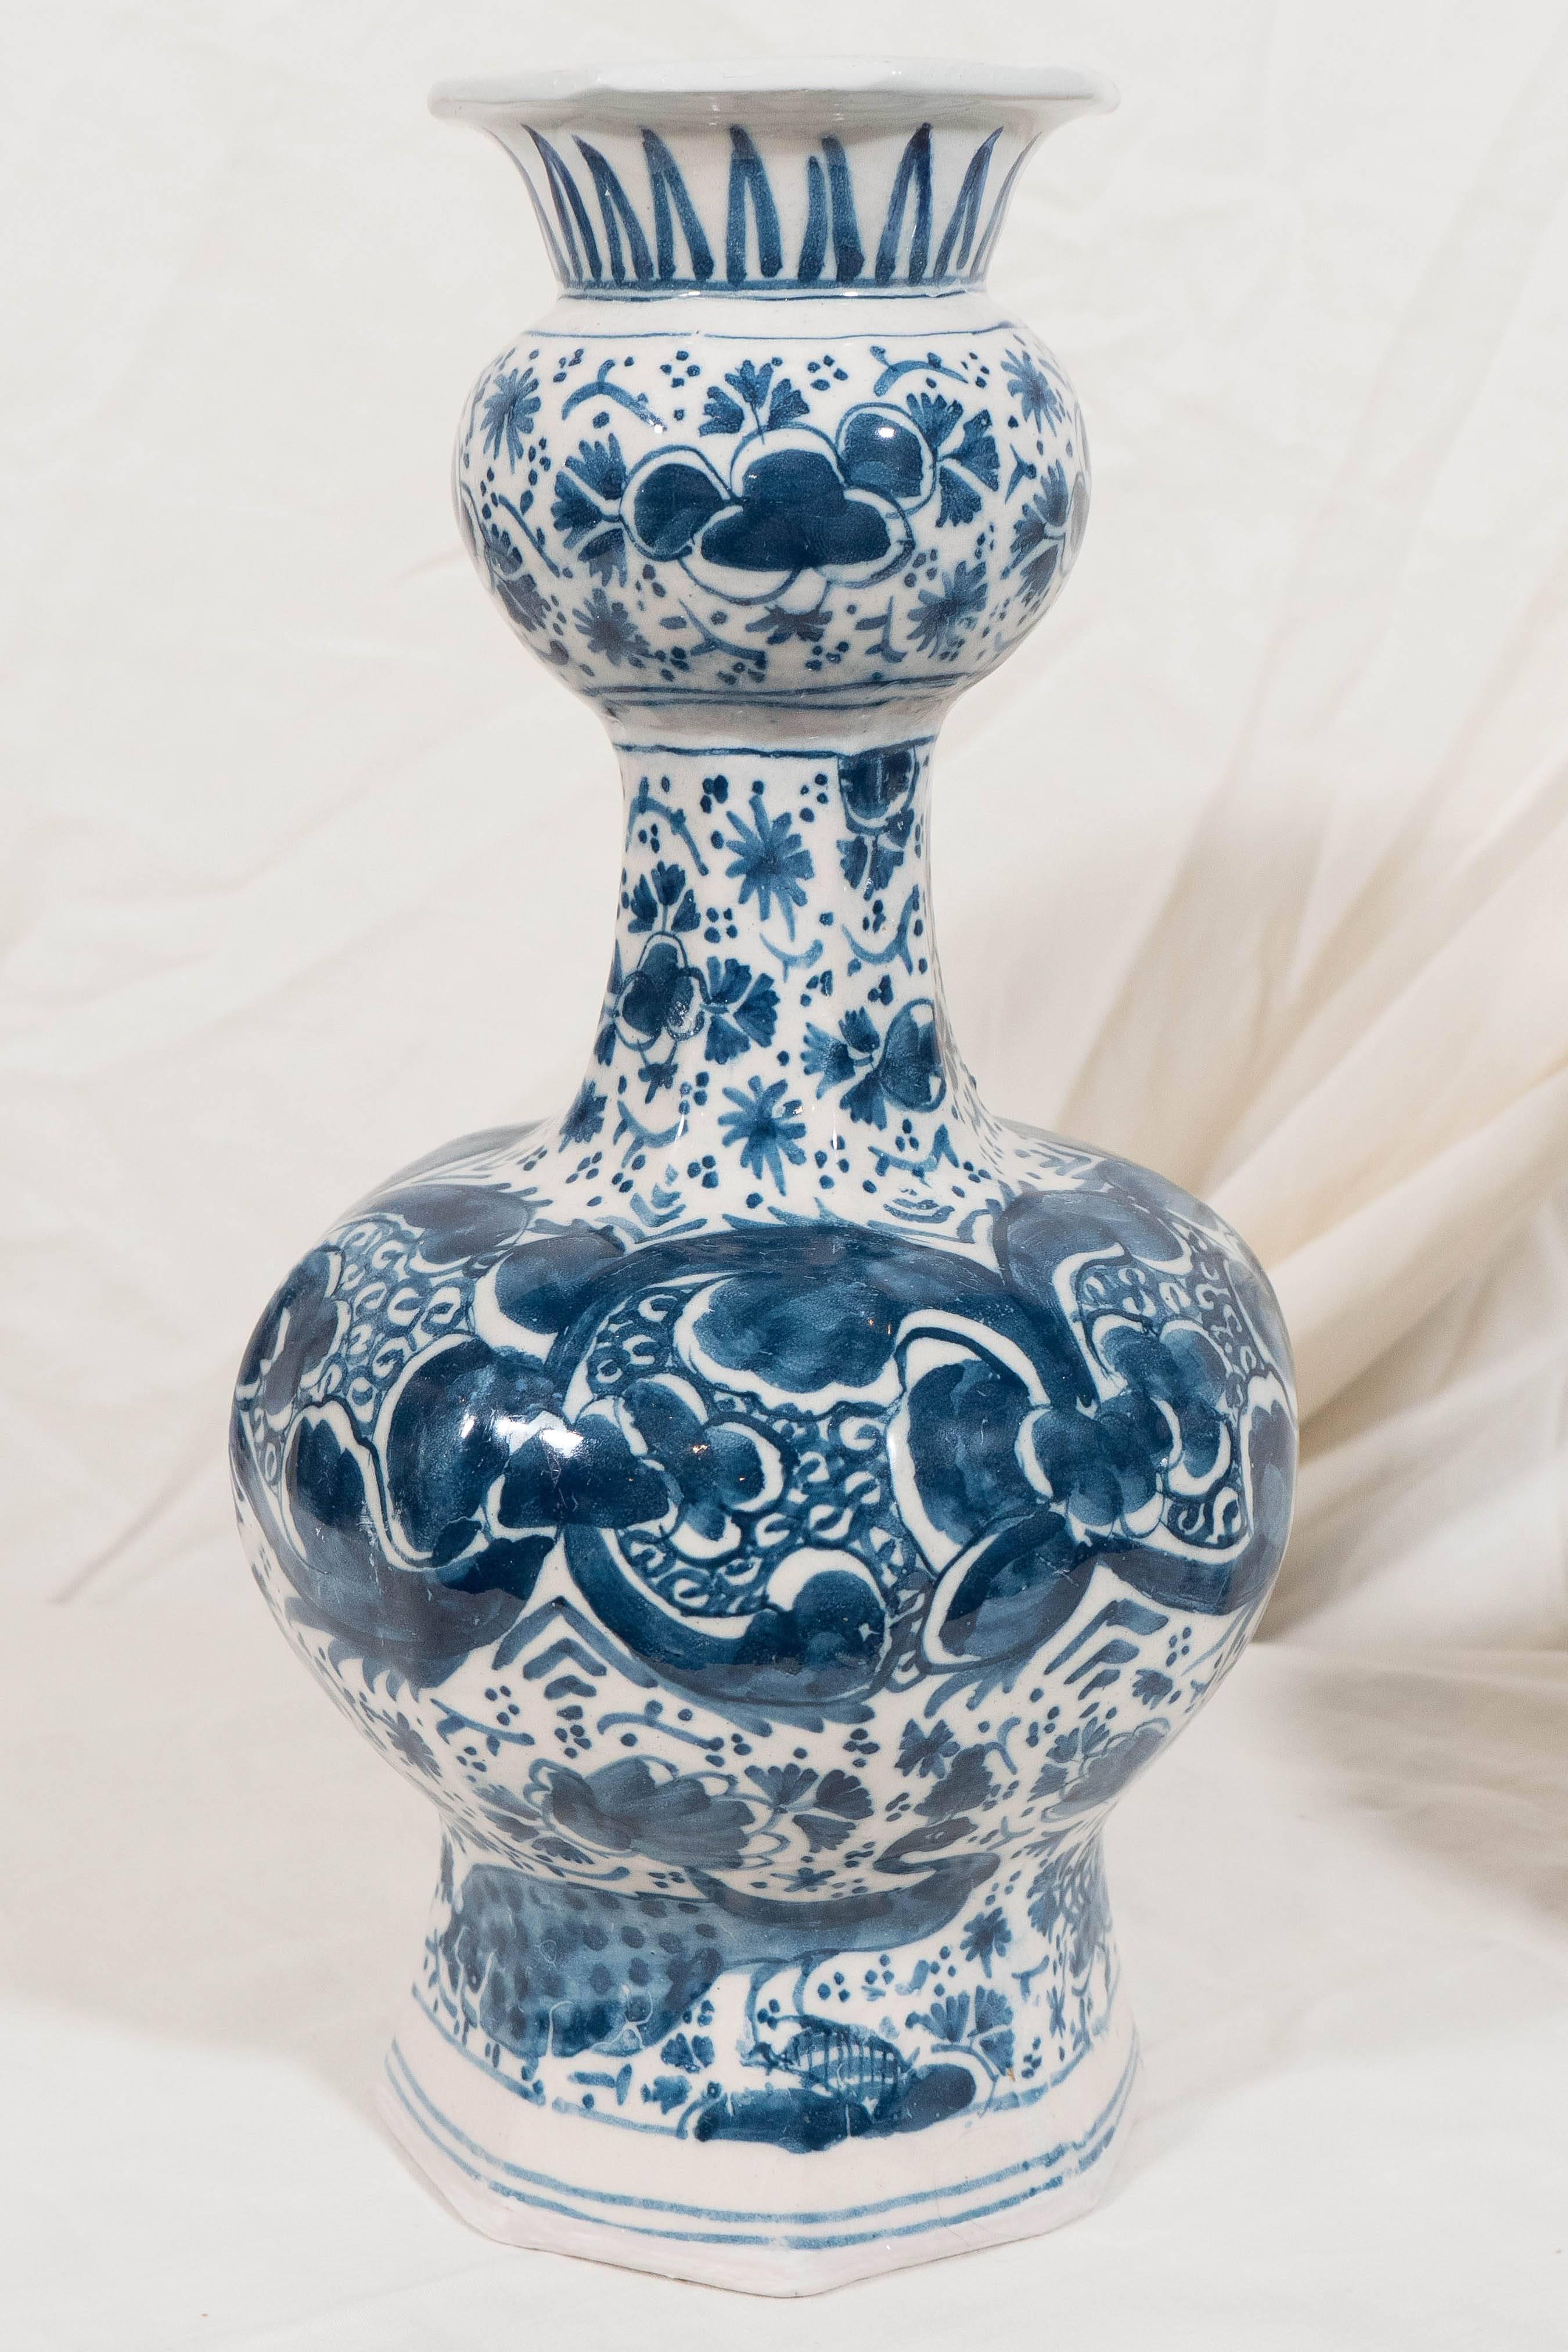 A pair of small Dutch Delft Blue and White vases painted in deep cobalt with a design of flowers, leaves, scrolling vines and a pair of peacocks 